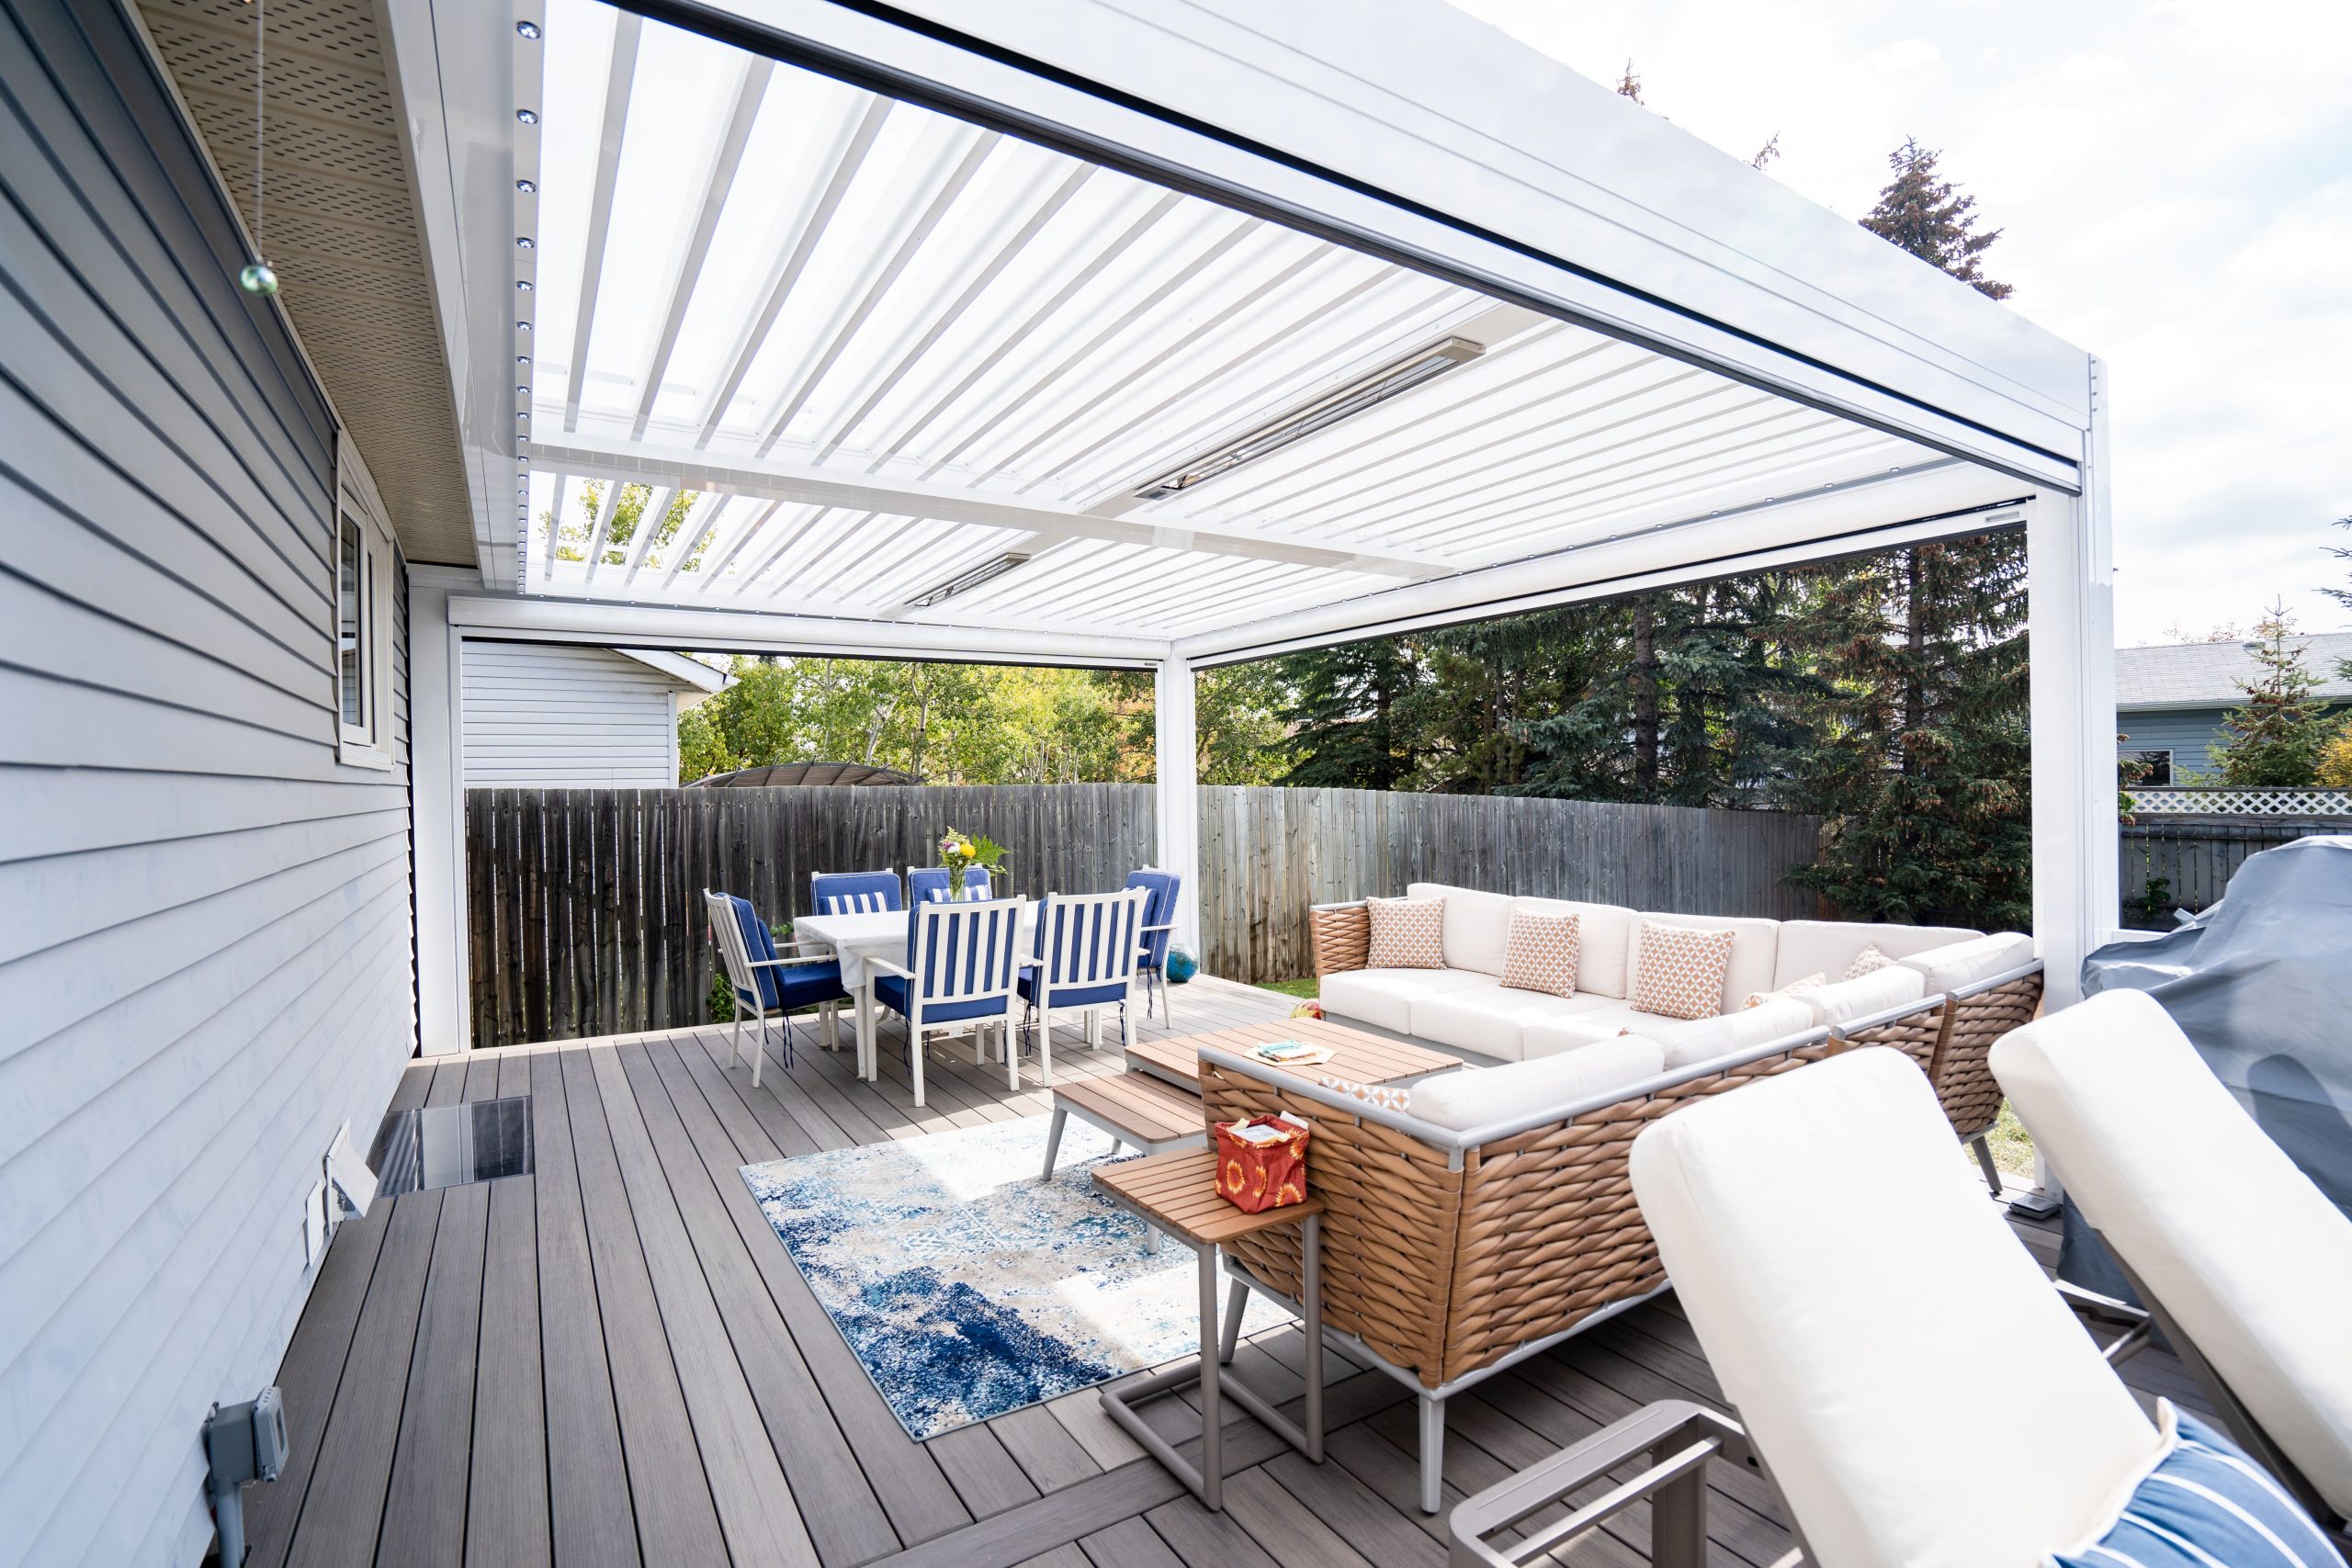 Retractable Screens and Louvered Roof for Outdoor Patio